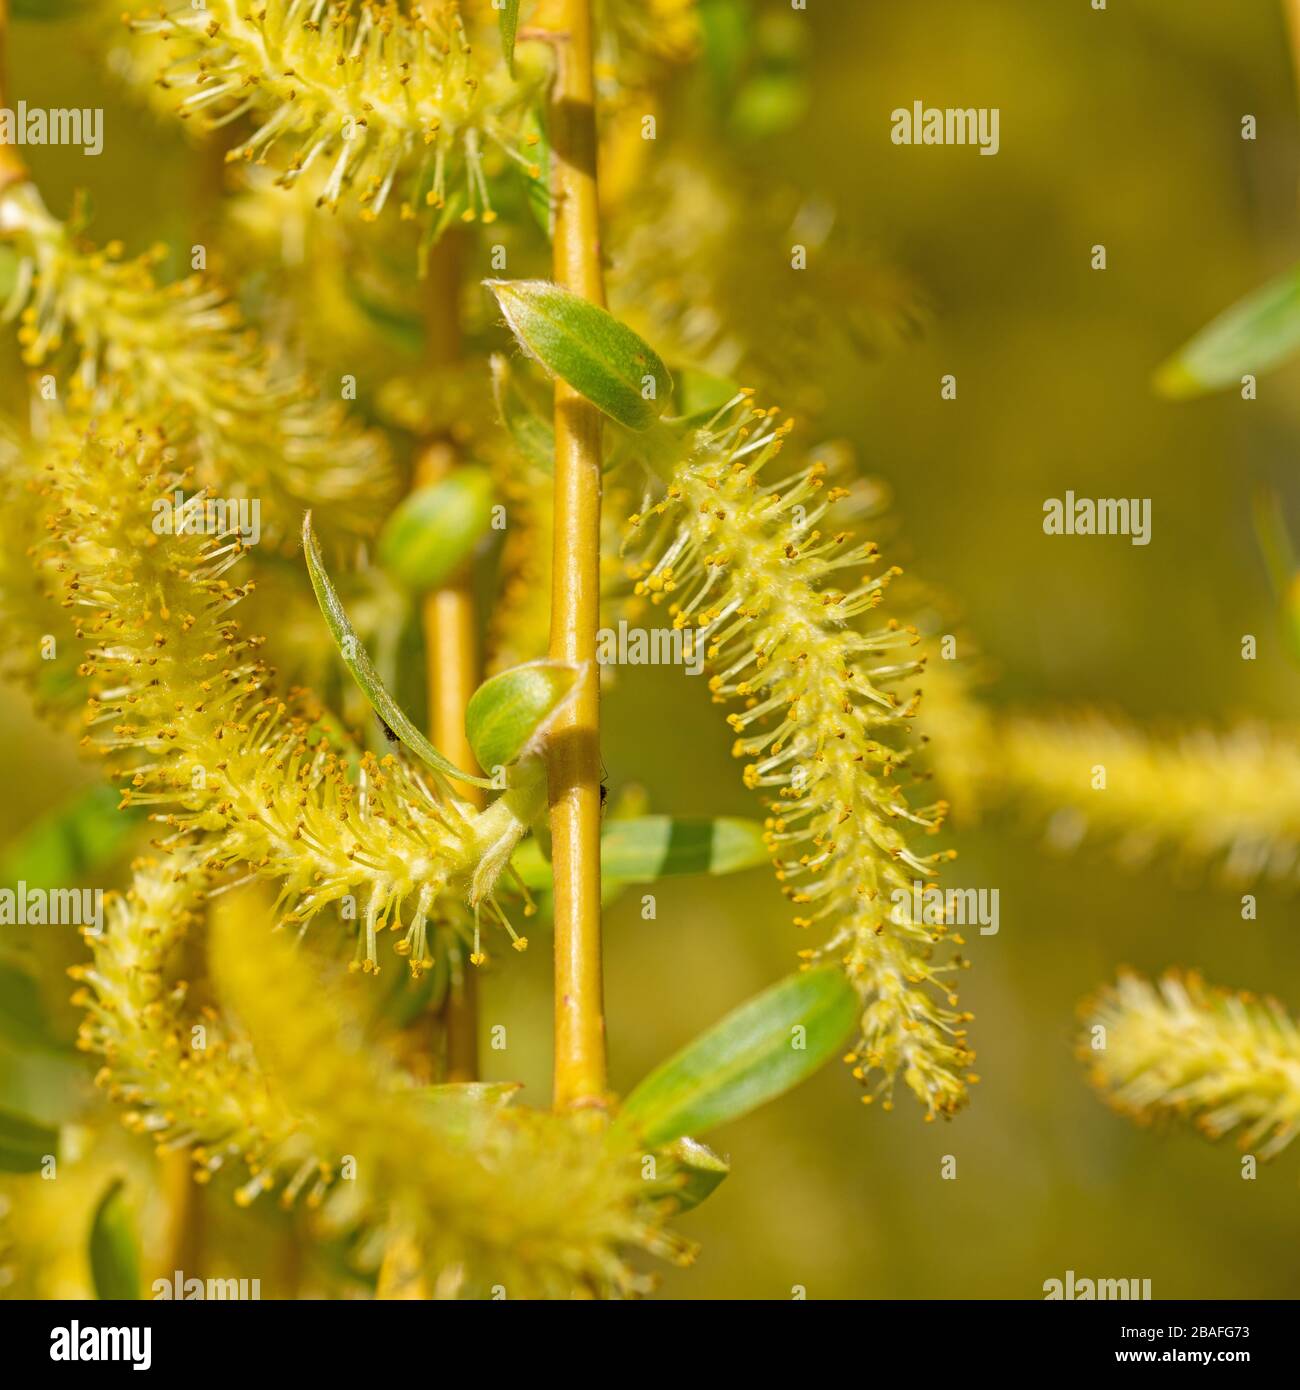 Male flowers of the weeping willow, Salix babylonica Stock Photo